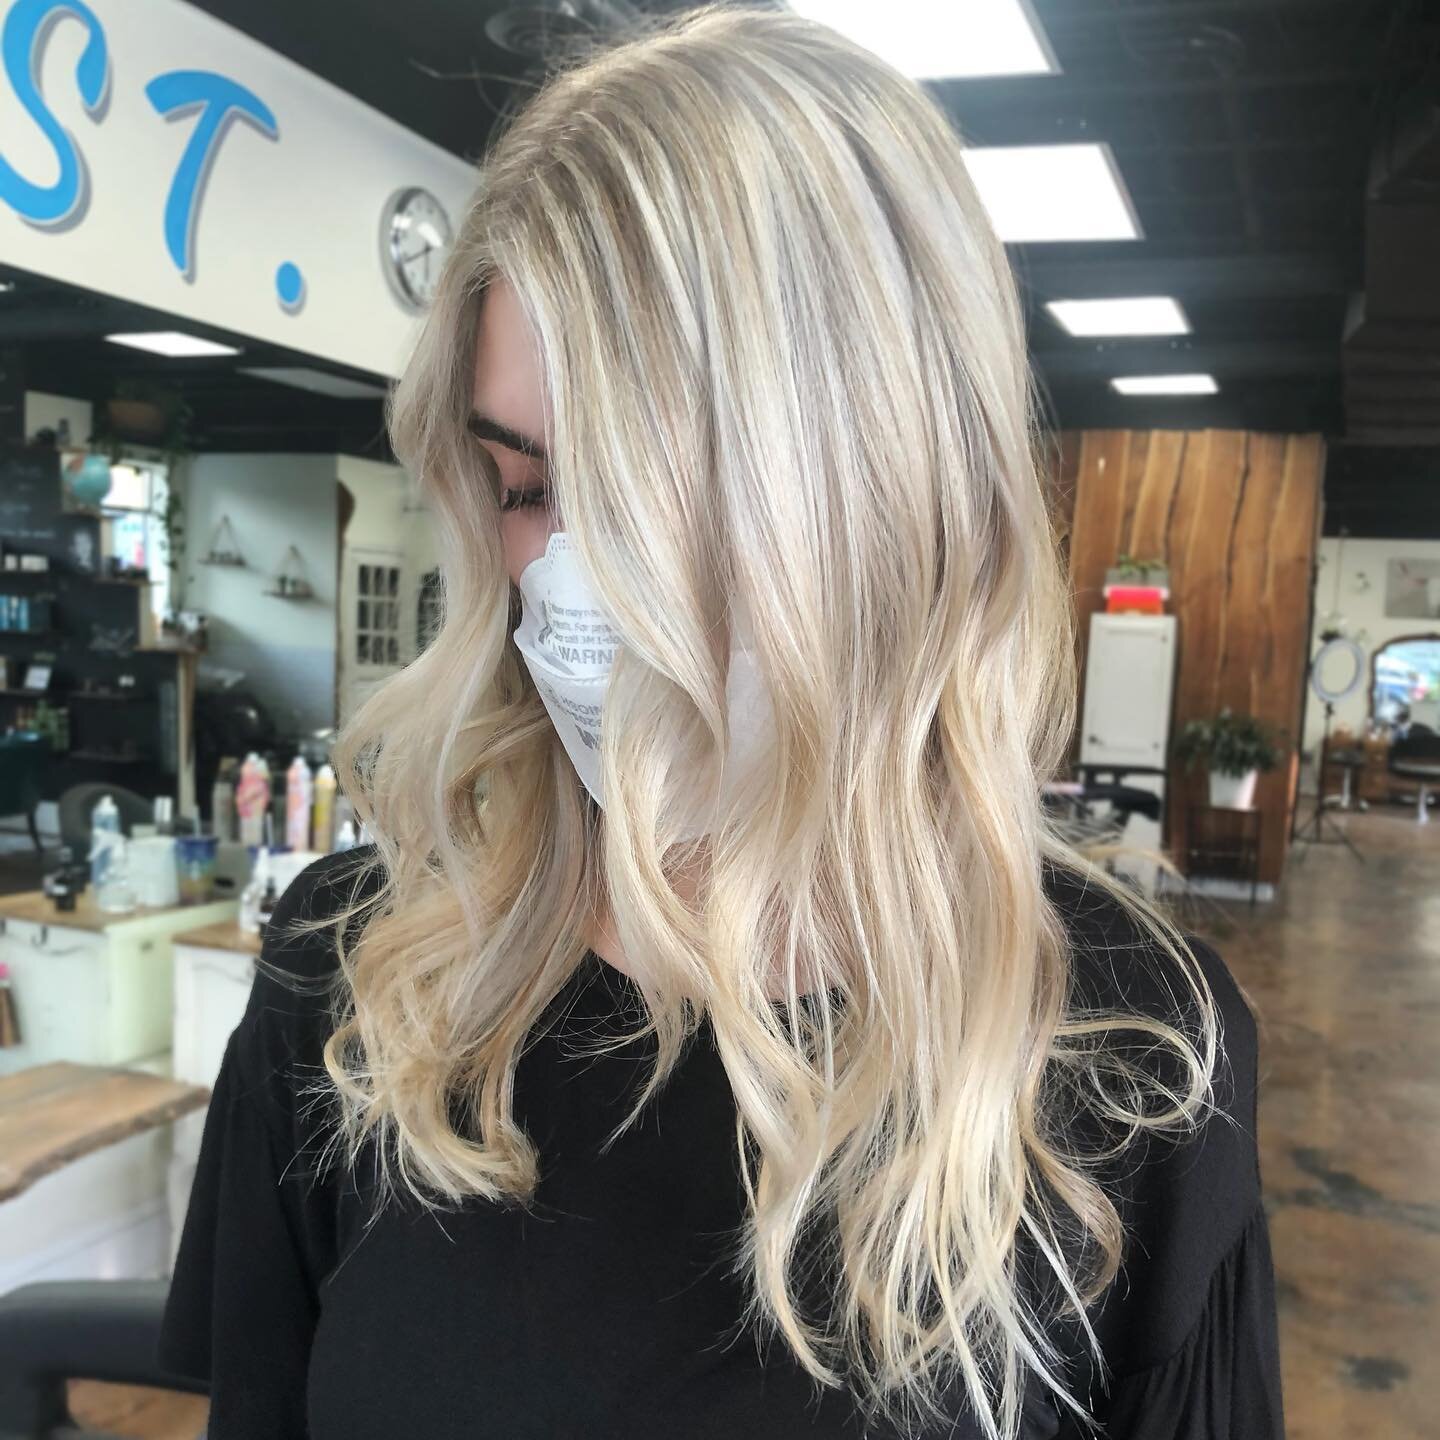 Beautiful blonde by @adrianedoeshair if you need a good blonde refresh come to #Blackrosehairsalon and we will take the best care of you #rockvillemd #salonlofts #goldwellapprovedus #beautifulblonde